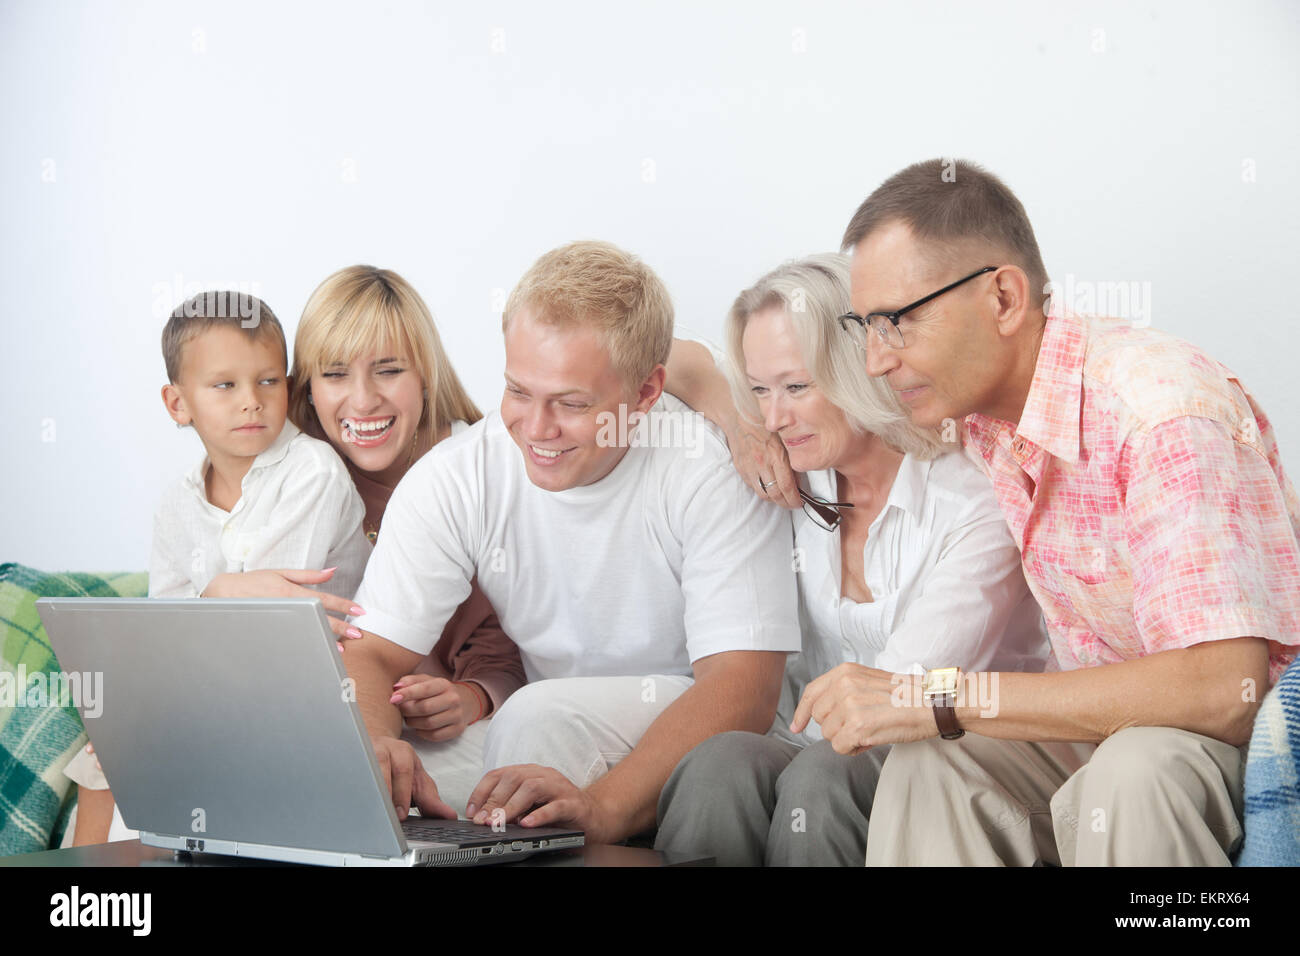 Family with computer Stock Photo